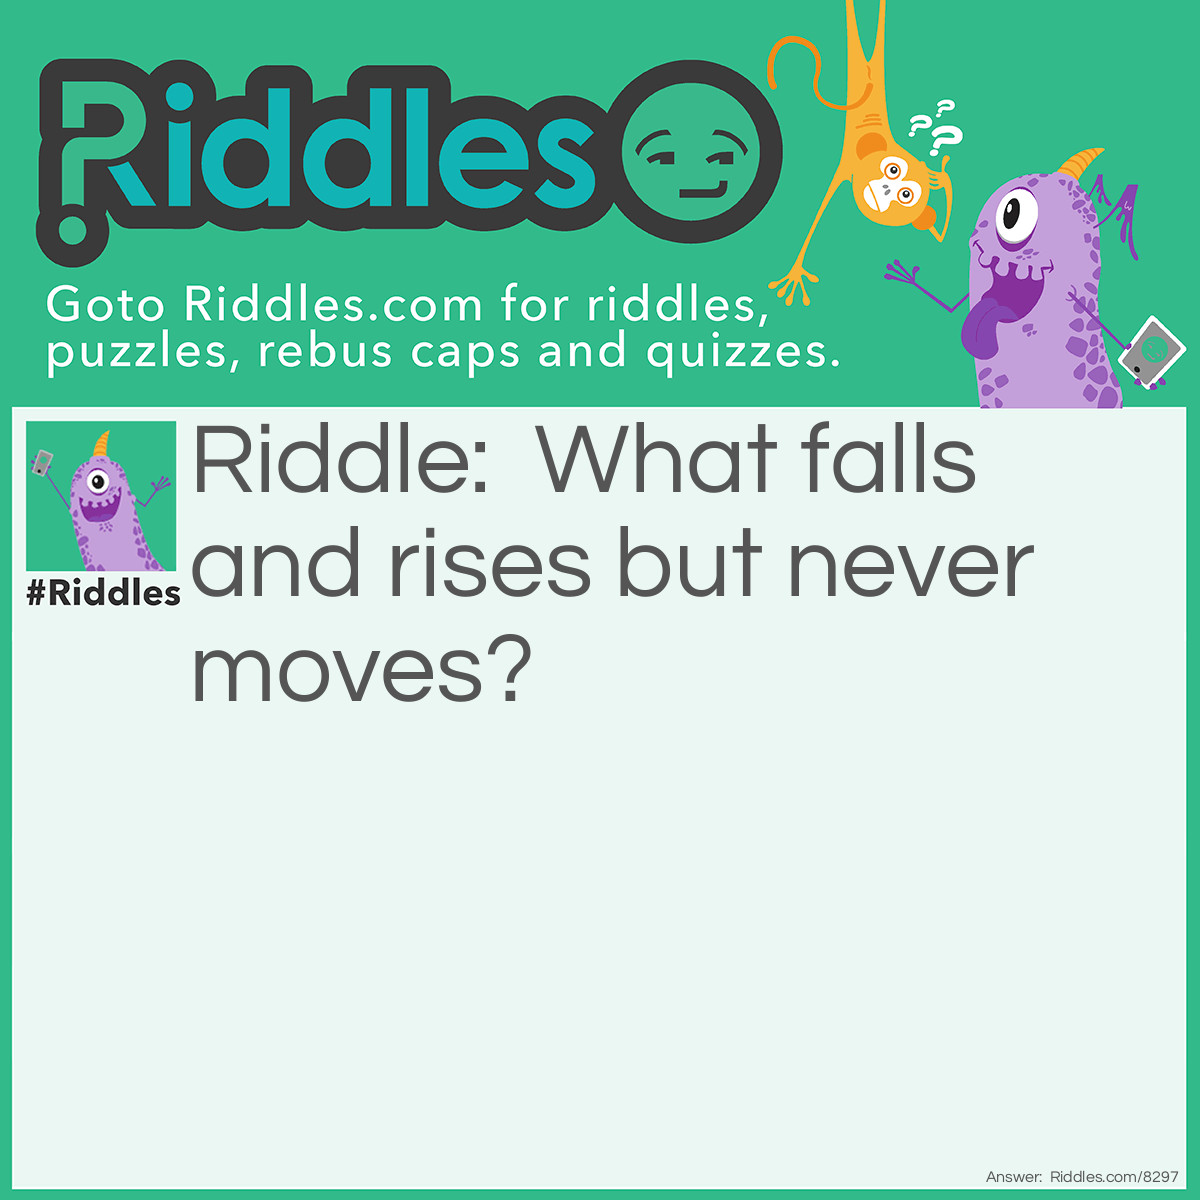 Riddle: What falls and rises but never moves? Answer: A stockmarket.